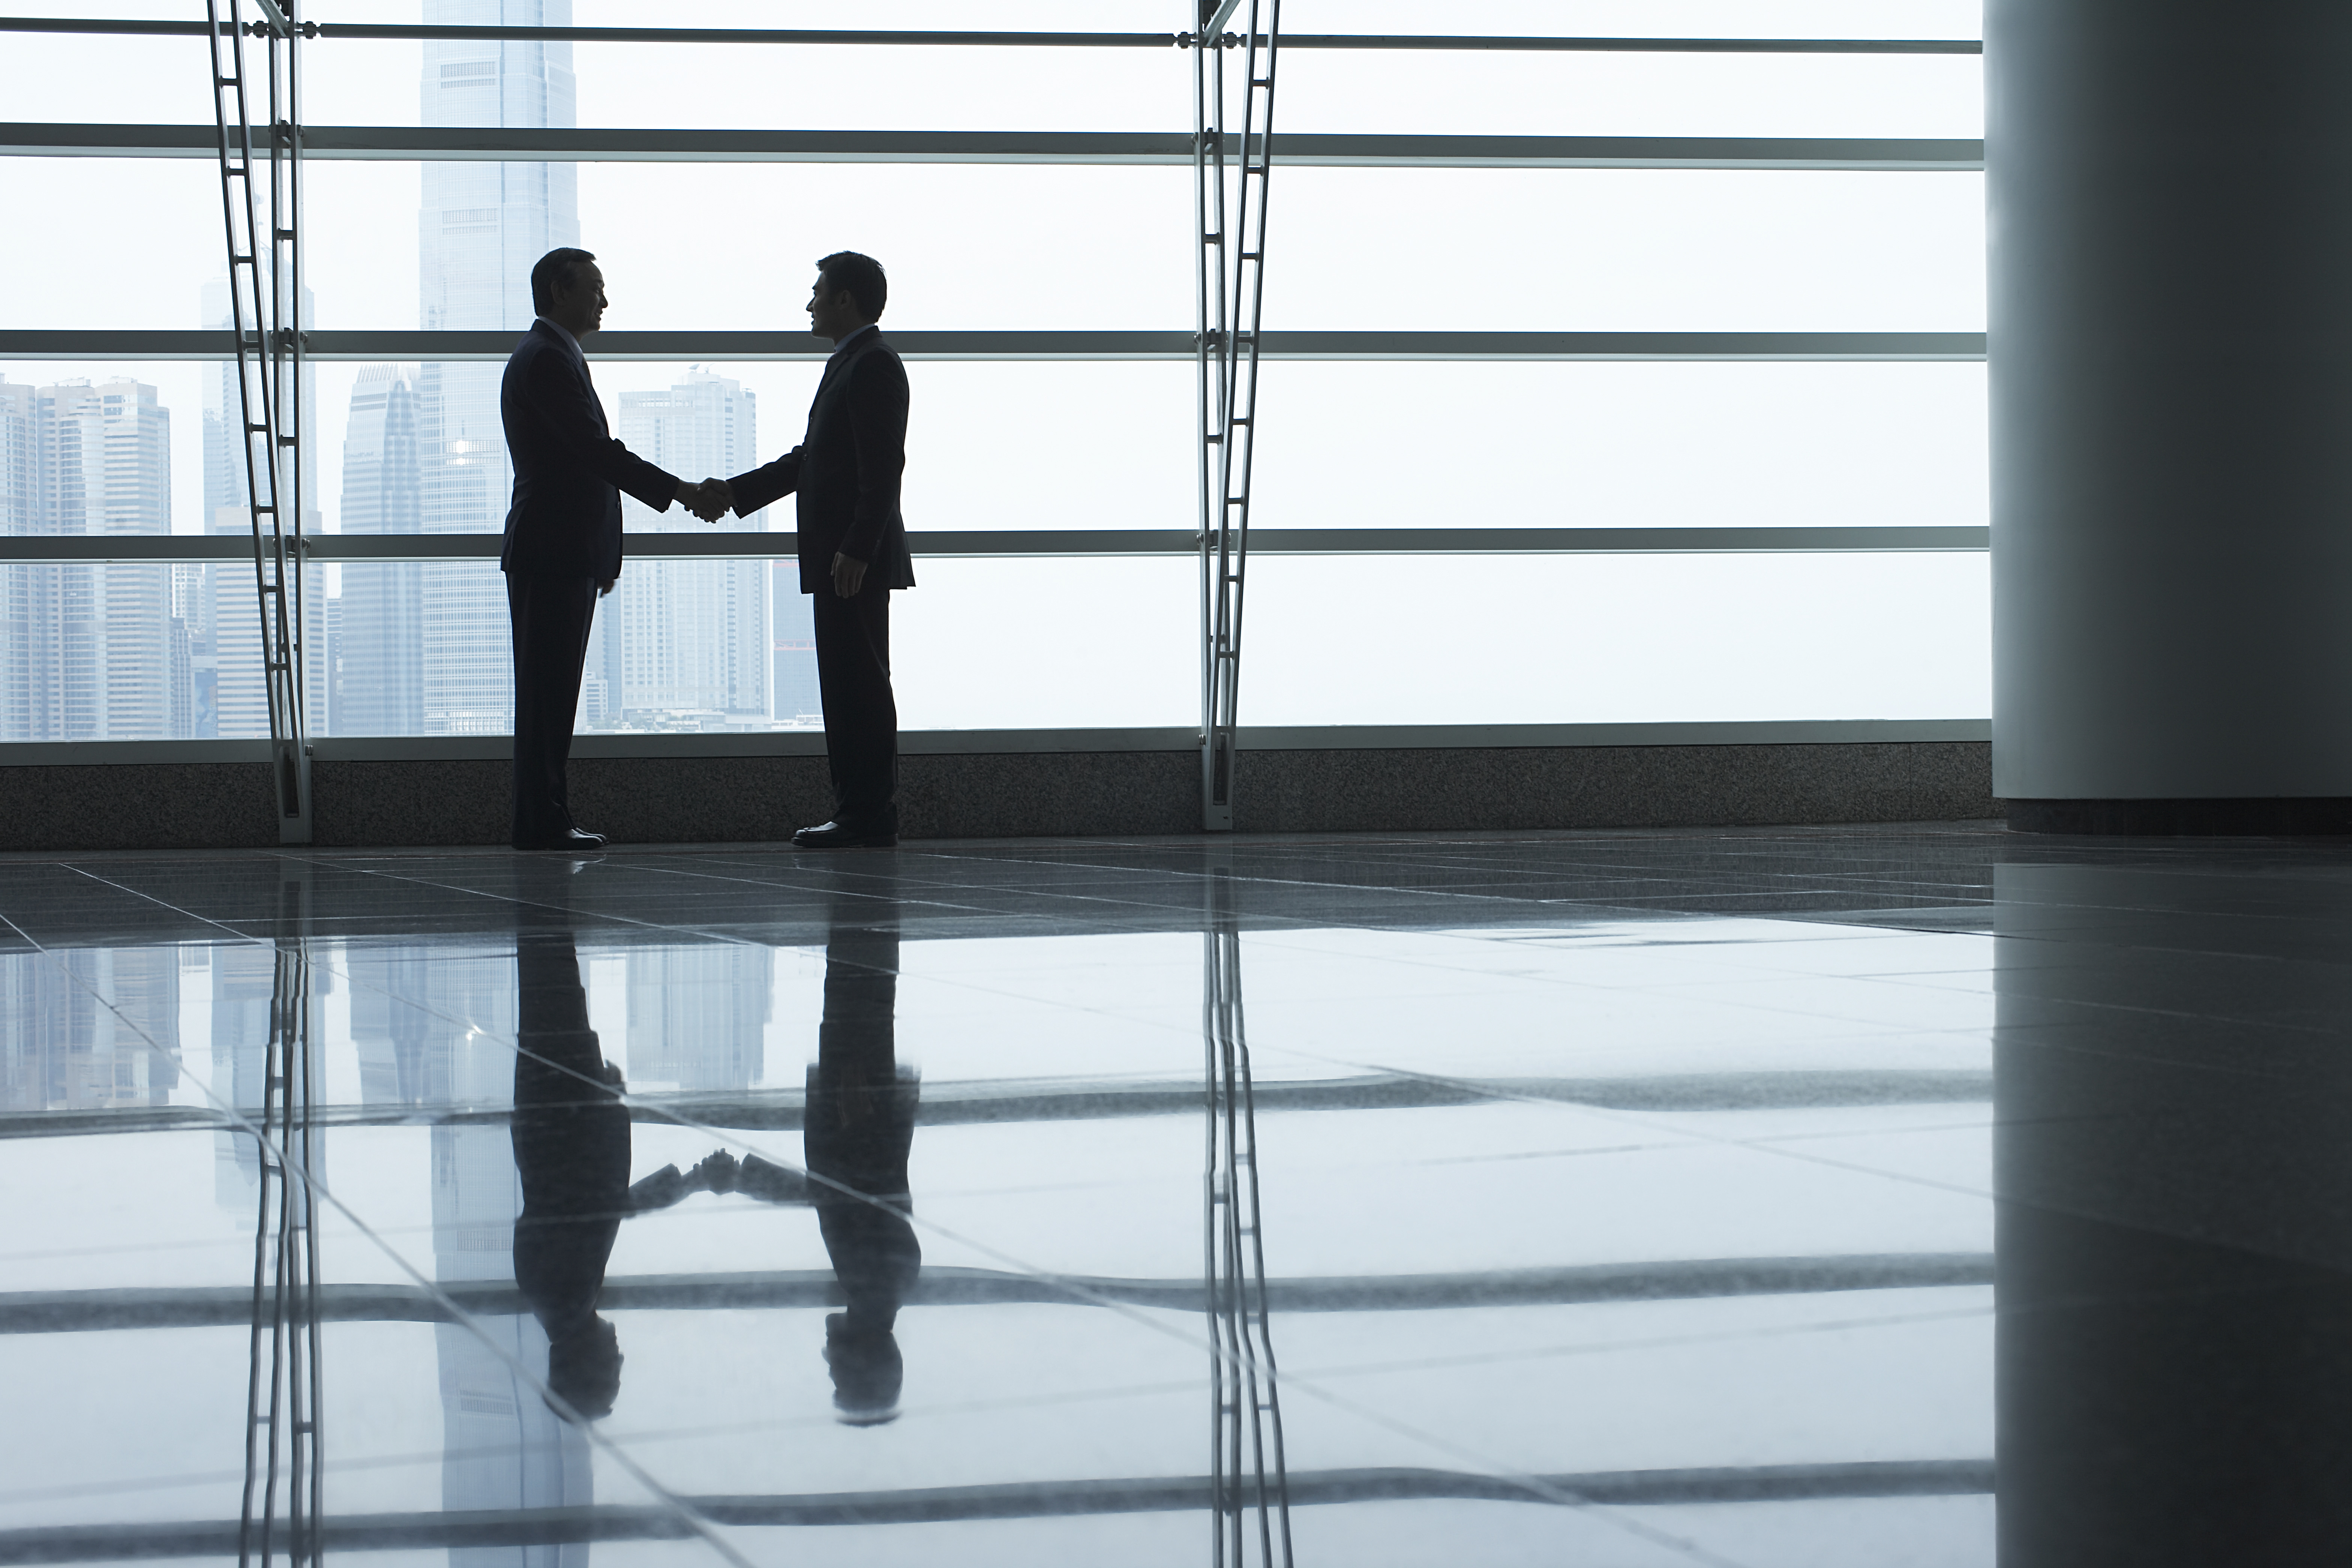 Two men shaking hands in lobby of building